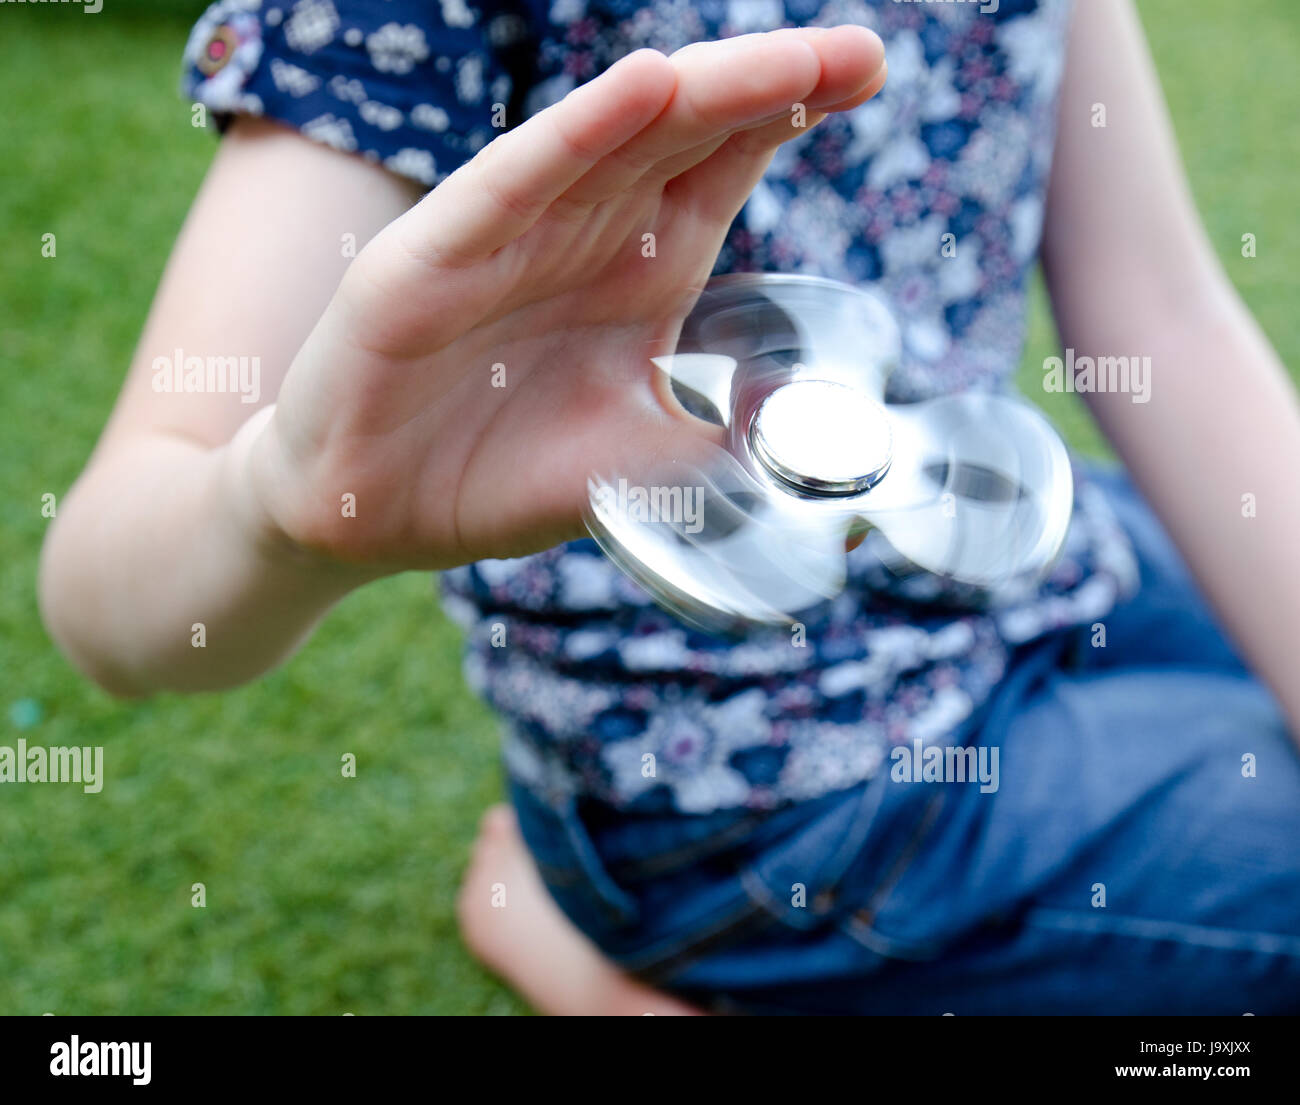 A child playing with a spinning fidget spinner in the garden Stock Photo